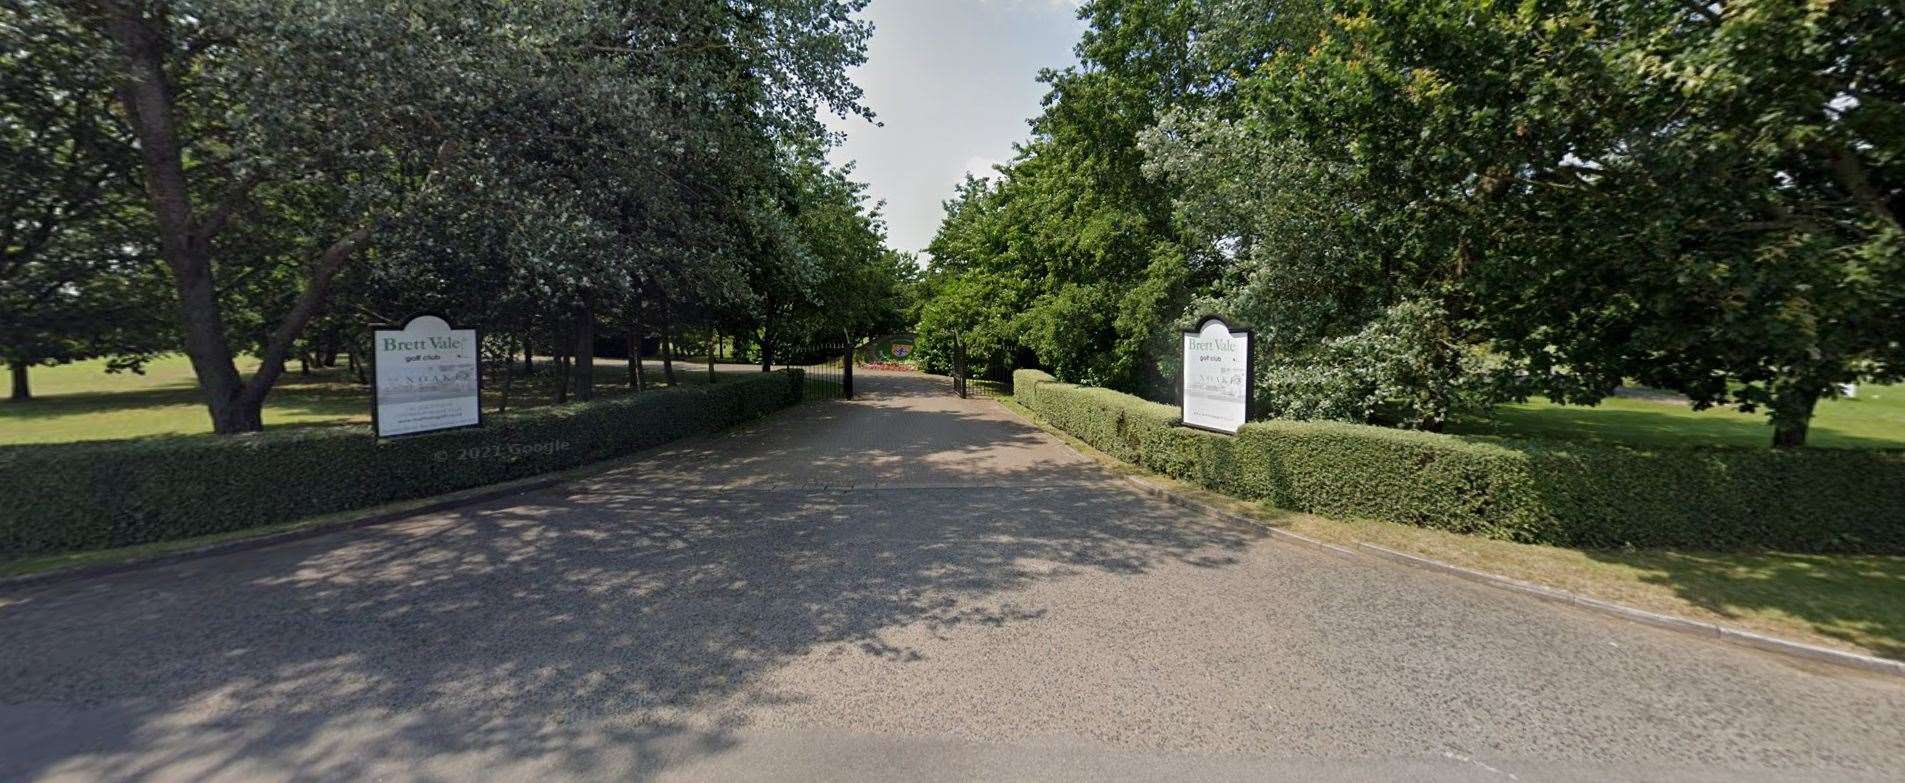 Brett Vale Golf Club, in Noaks Road, Raydon, near Ipswich, has had a planning application for 38 new holiday lodges refused. Picture: Google Maps